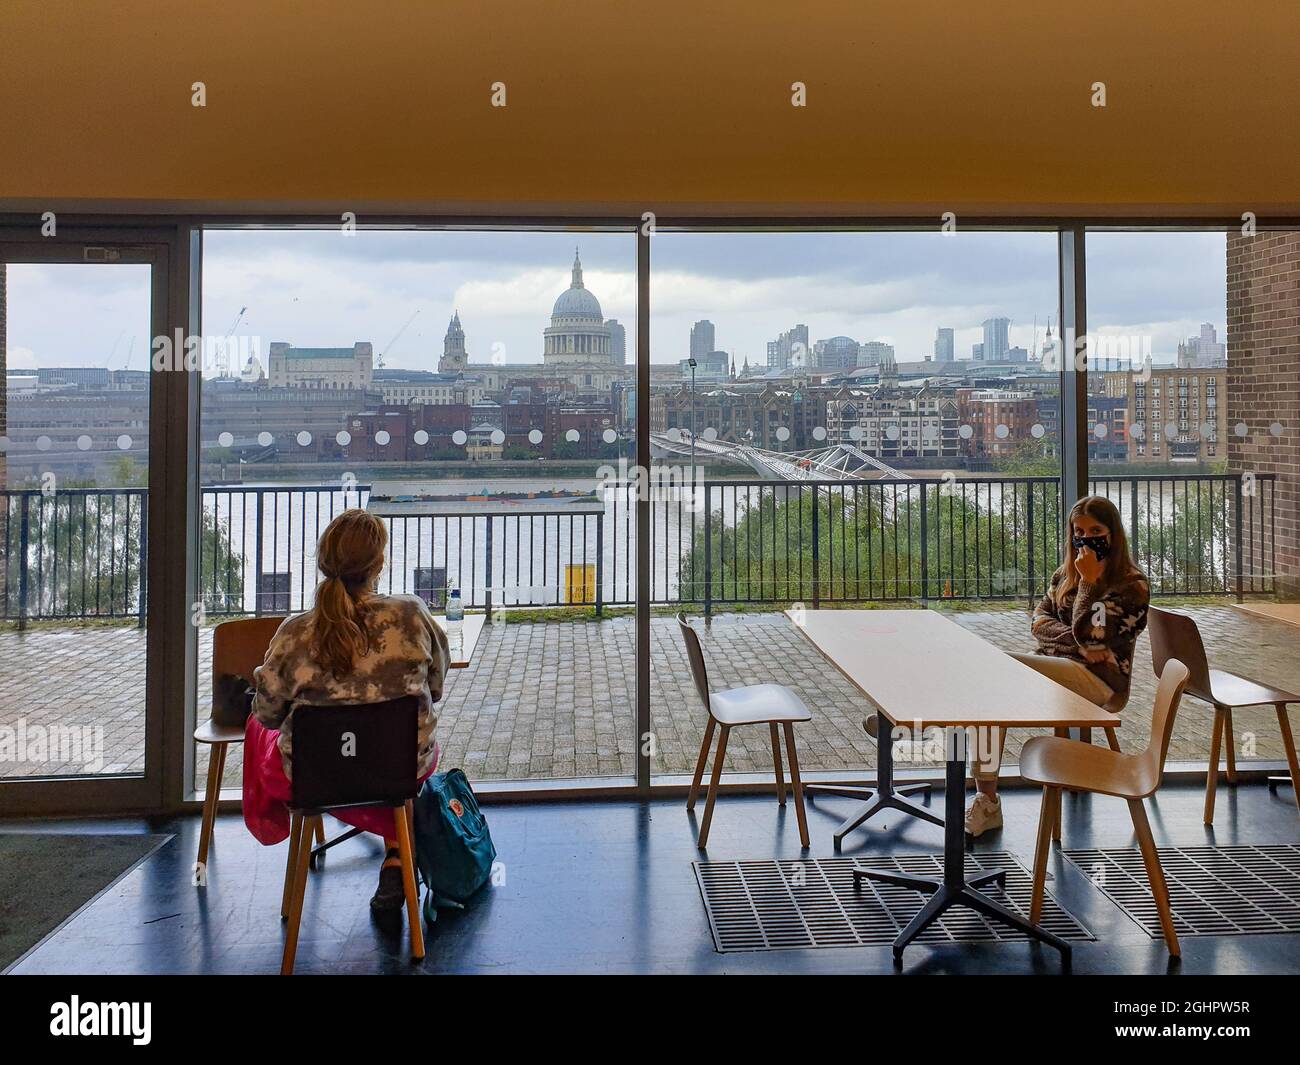 London, United Kingdom - July 30, 2021: Two women relax at the Cafe of Tate Modern Gallery overlooking St Paul's Cathedral Stock Photo